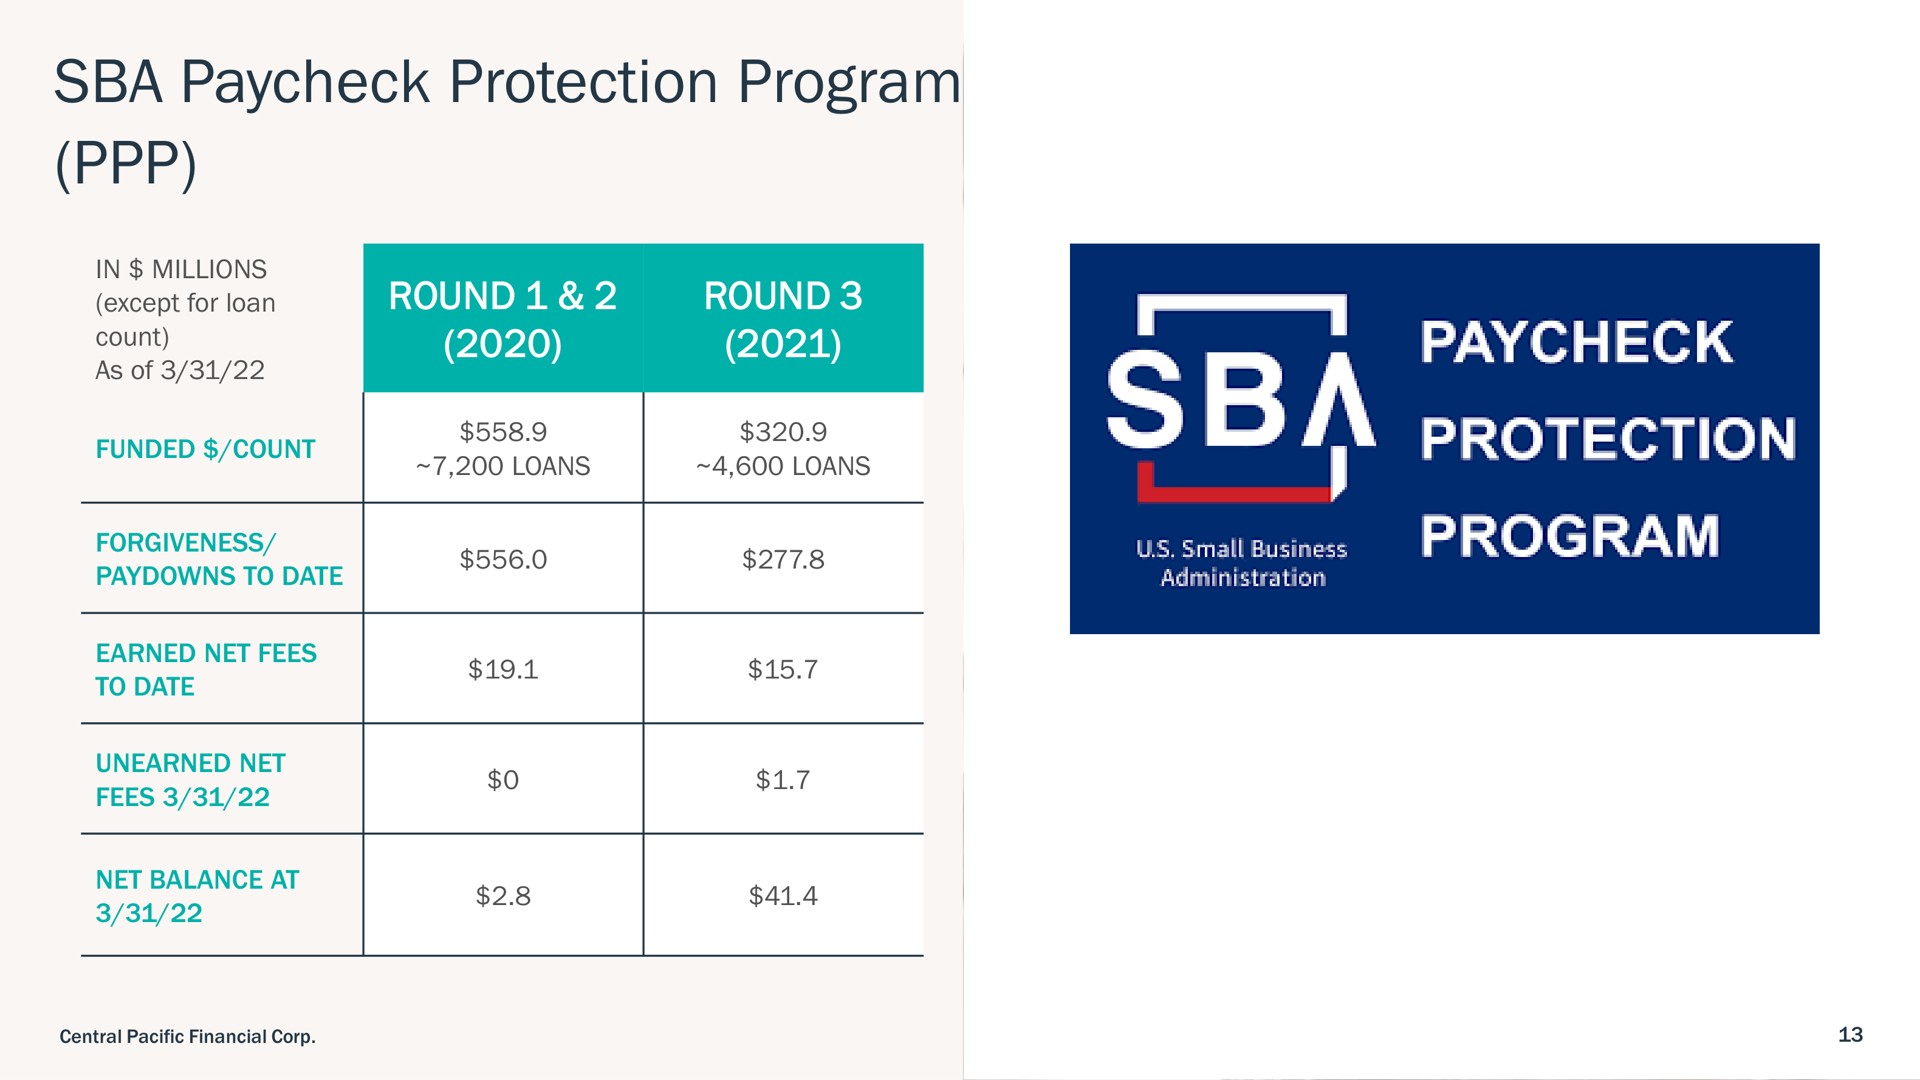 protection program round round count a | Central Pacific Financial